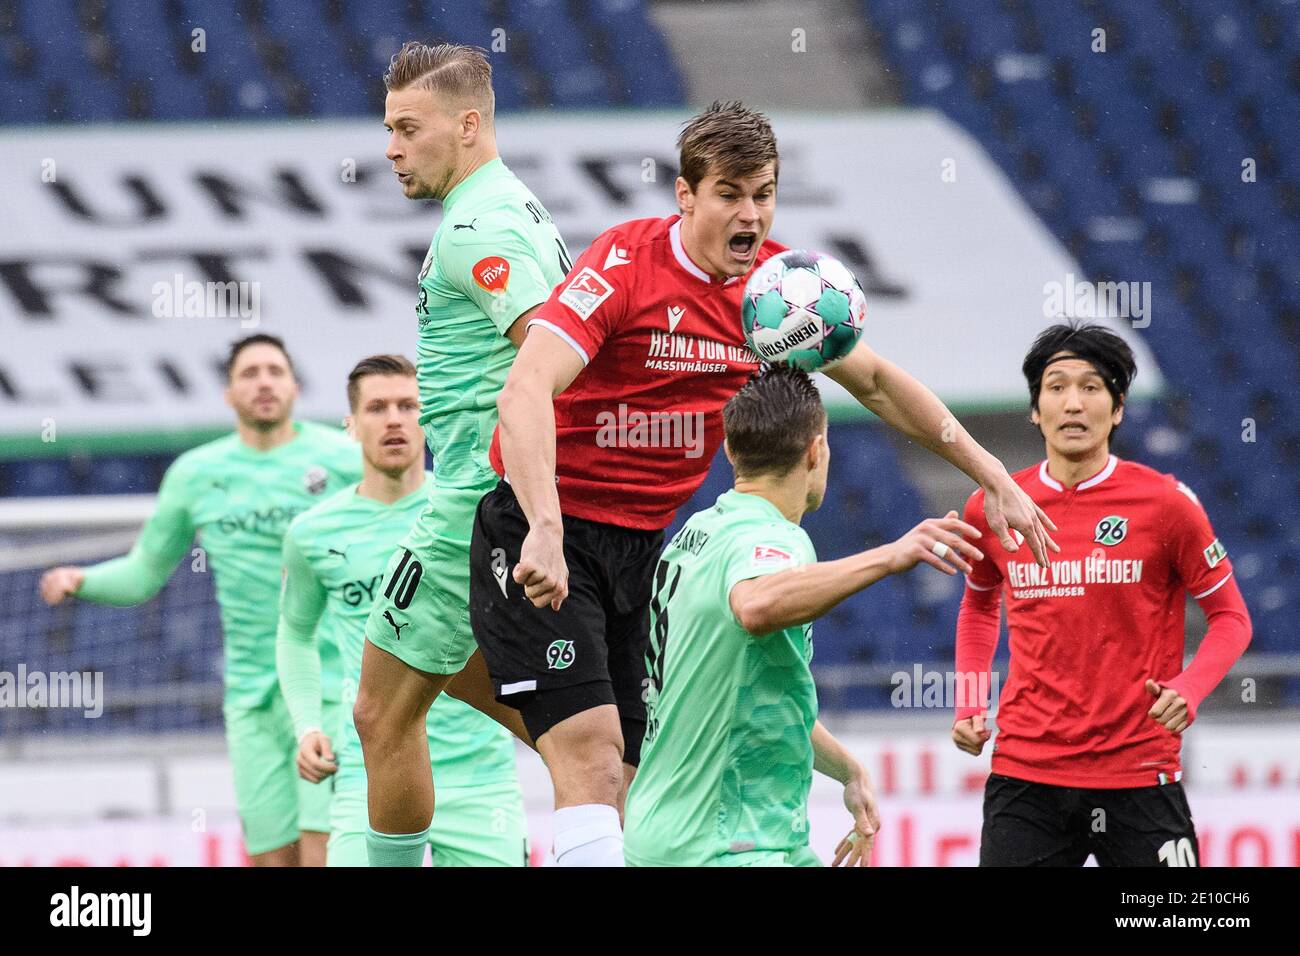 Hanover, Germany. 03rd Jan, 2021. Football: 2. Bundesliga, Hannover 96 - SV Sandhausen, Matchday 14 at the HDI Arena. Hannover's Jaka Bikol (M) plays against Sandhausen's Julius Biada (l, 10) and Sandhausen's Kevin Behrens. Credit: Swen Pförtner/dpa - IMPORTANT NOTE: In accordance with the regulations of the DFL Deutsche Fußball Liga and/or the DFB Deutscher Fußball-Bund, it is prohibited to use or have used photographs taken in the stadium and/or of the match in the form of sequence pictures and/or video-like photo series./dpa/Alamy Live News Stock Photo